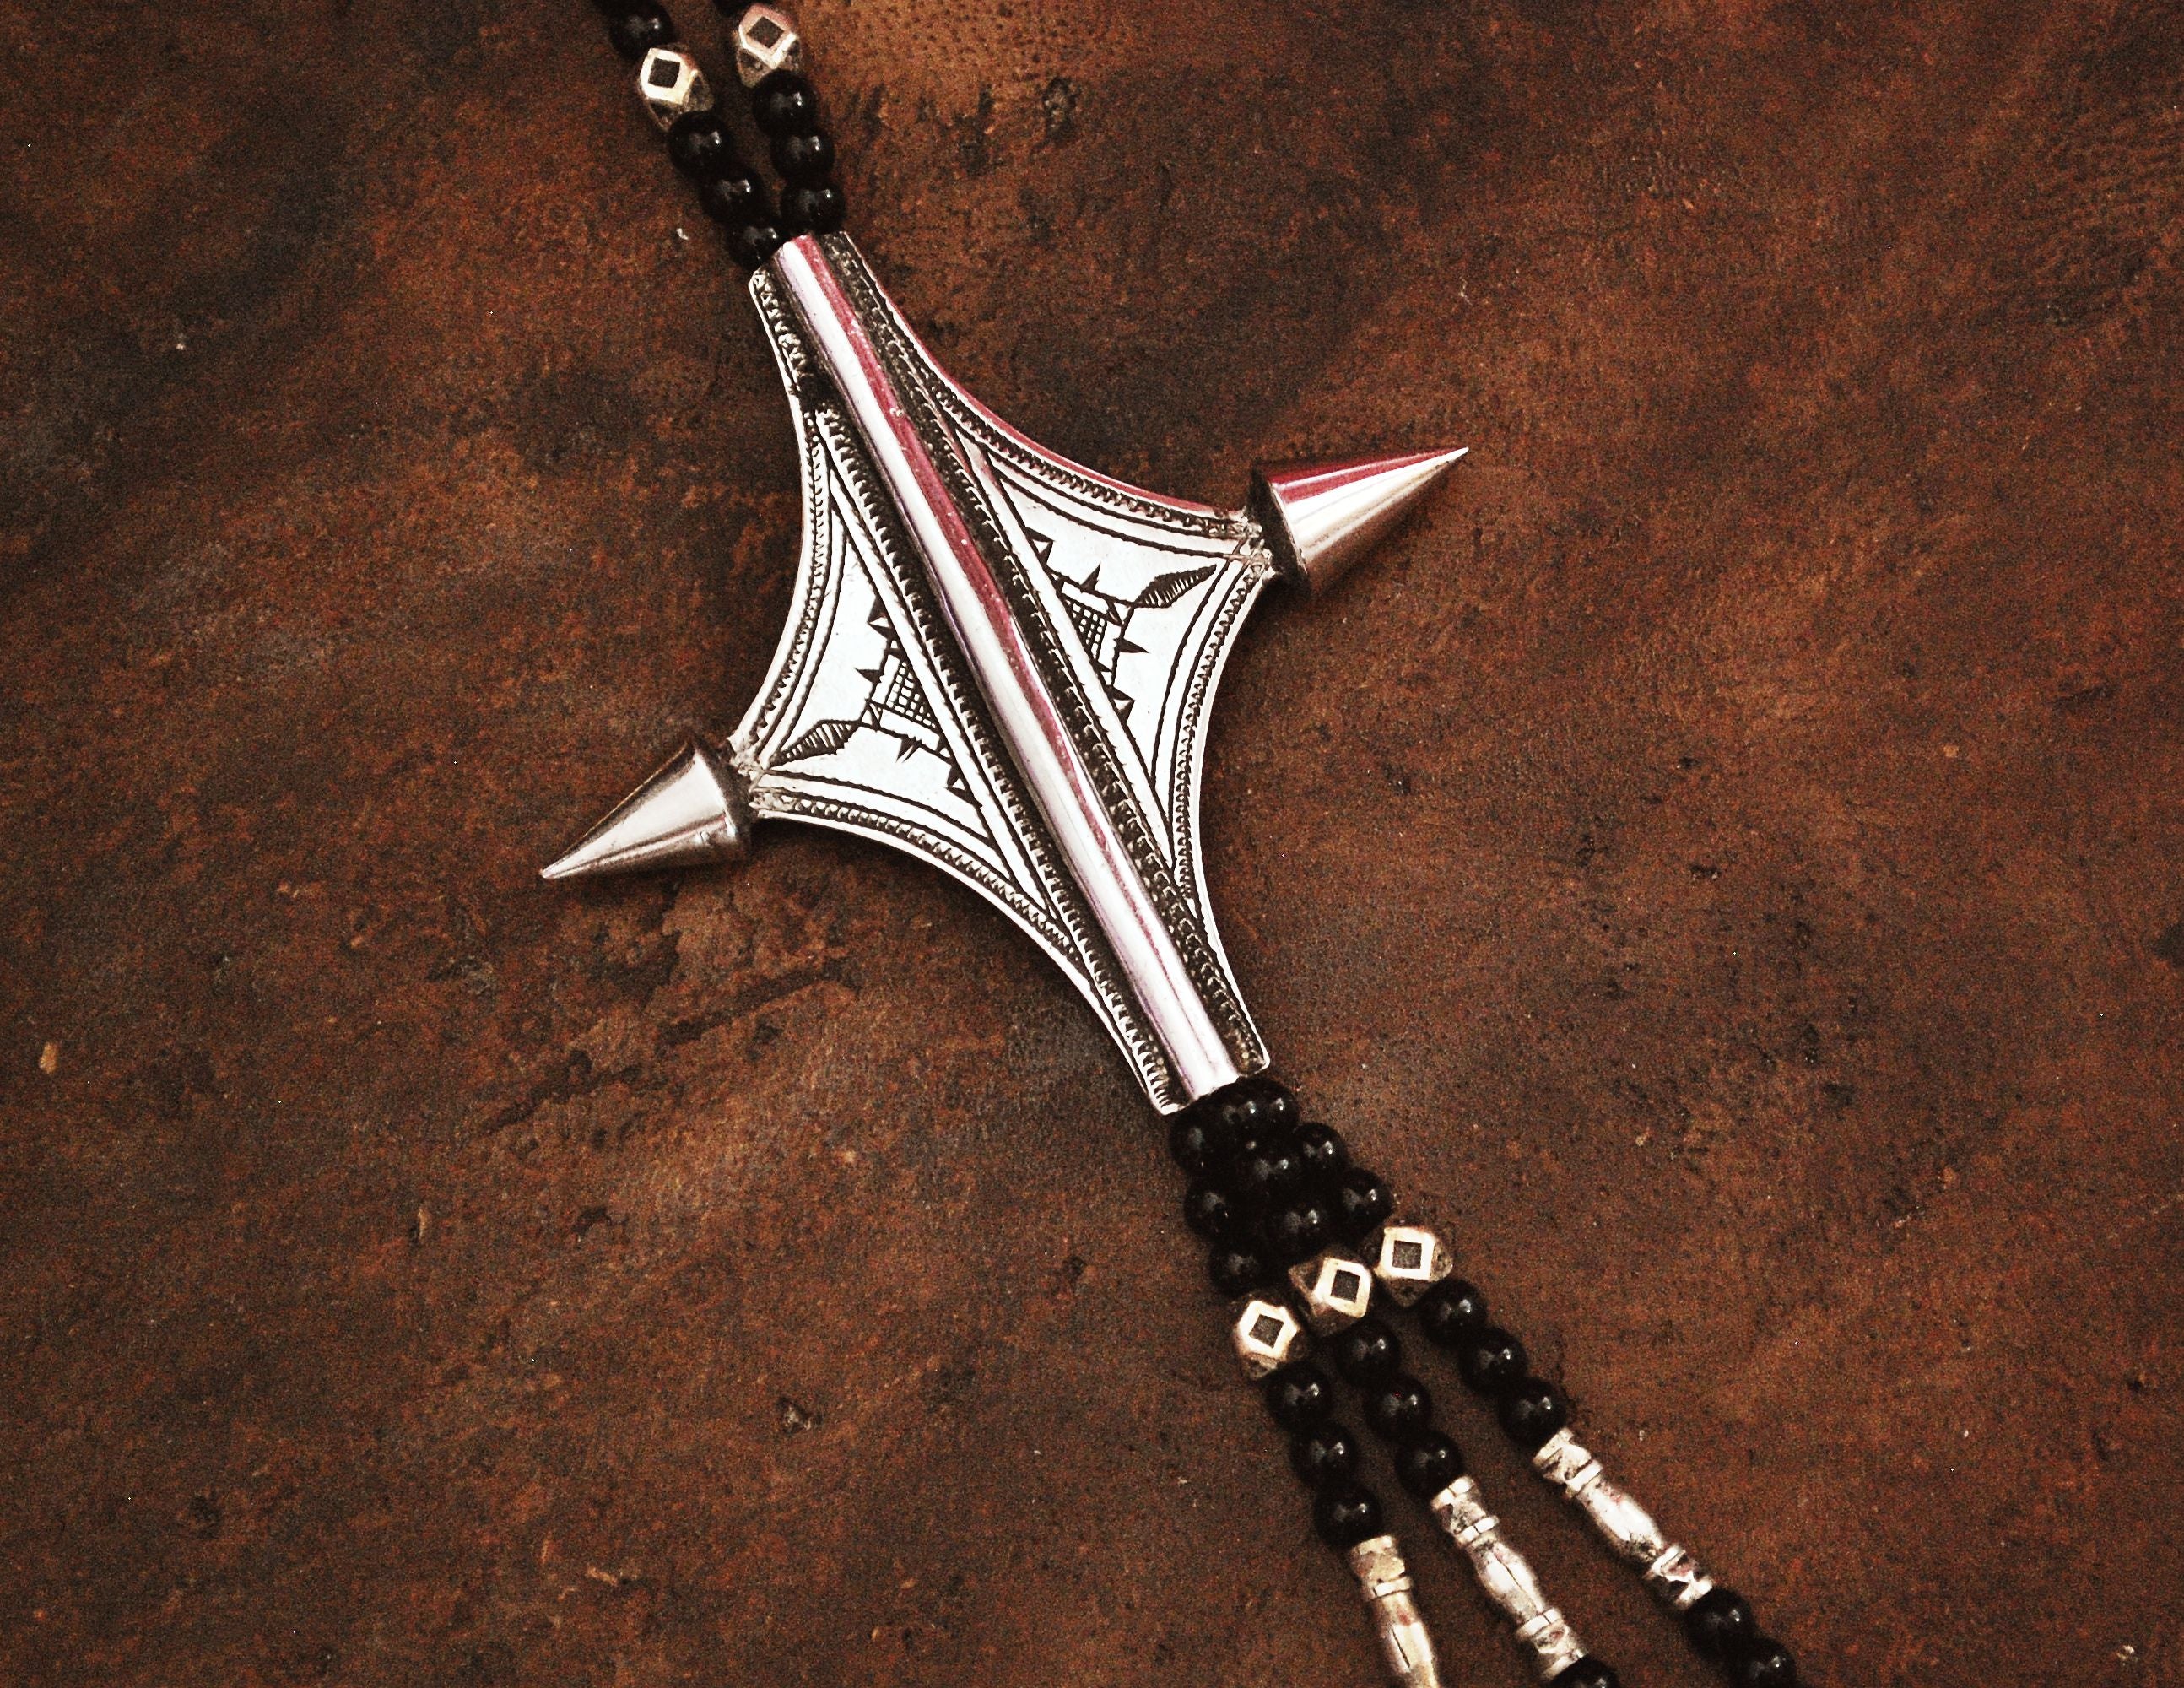 Tuareg "Egourou" Cross Necklace with Glass and Silver Beads